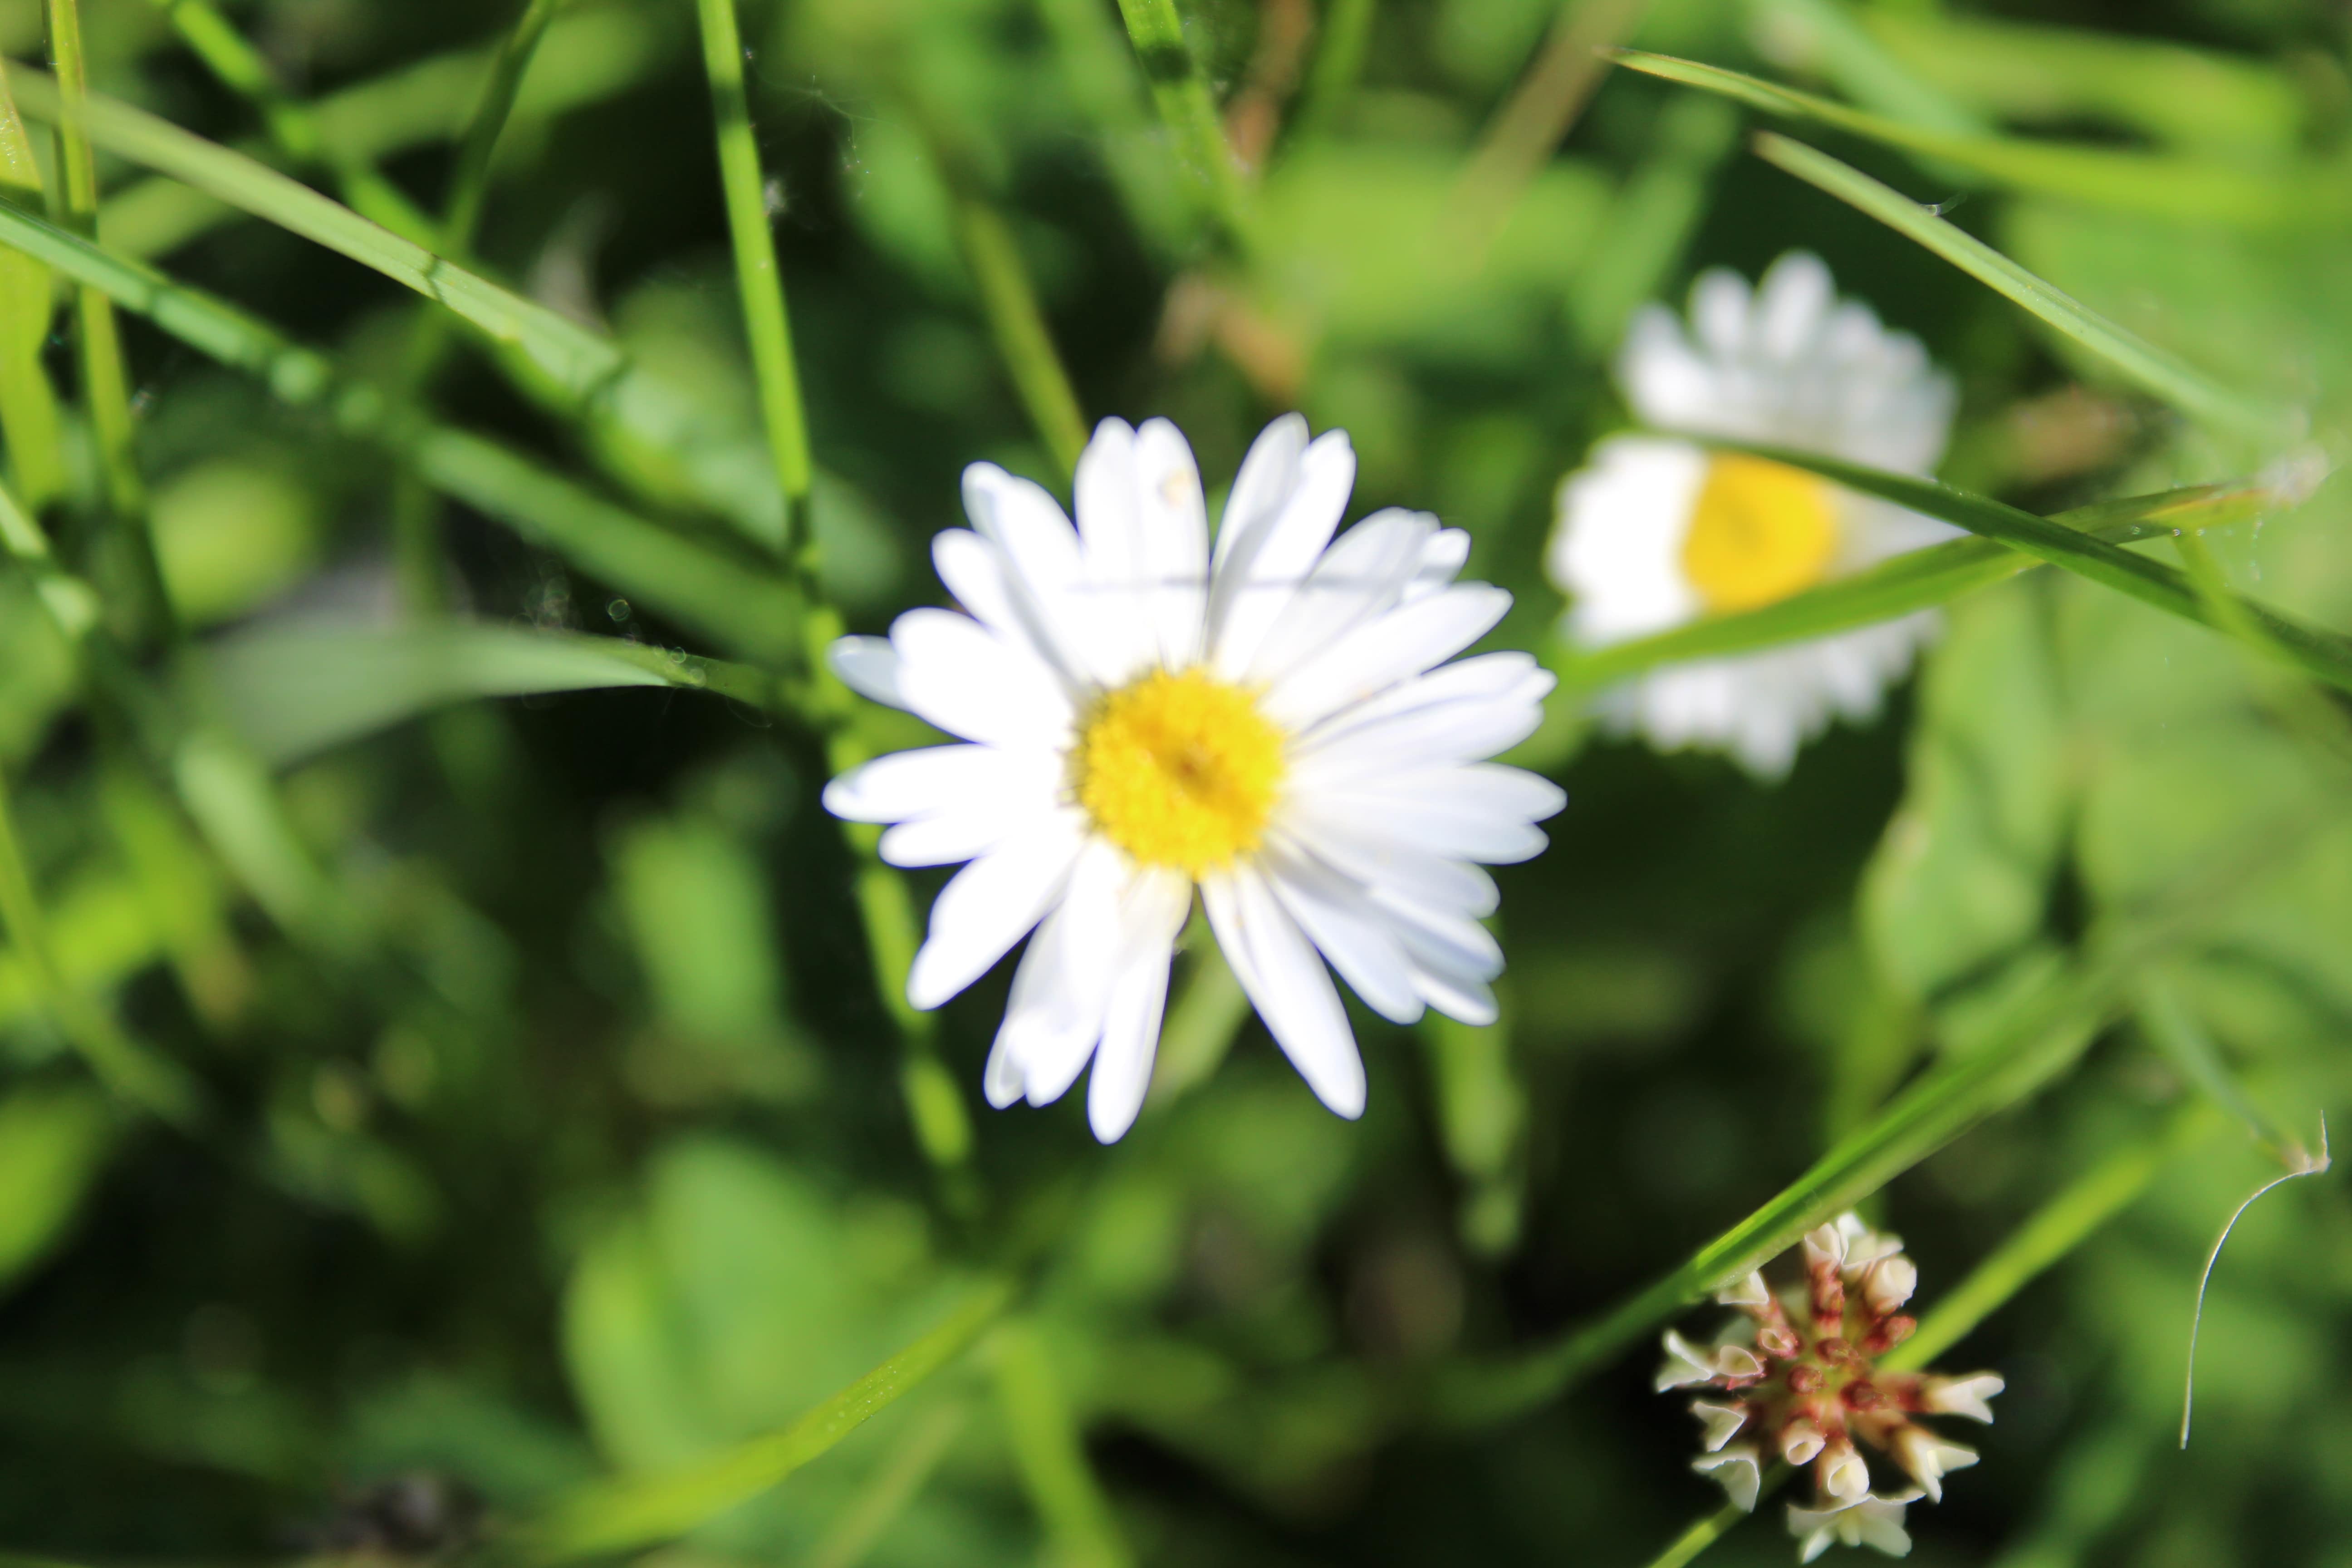 Close-up of White Daisy flower with another white daisy flower slightly blurred behind in Green Grass.